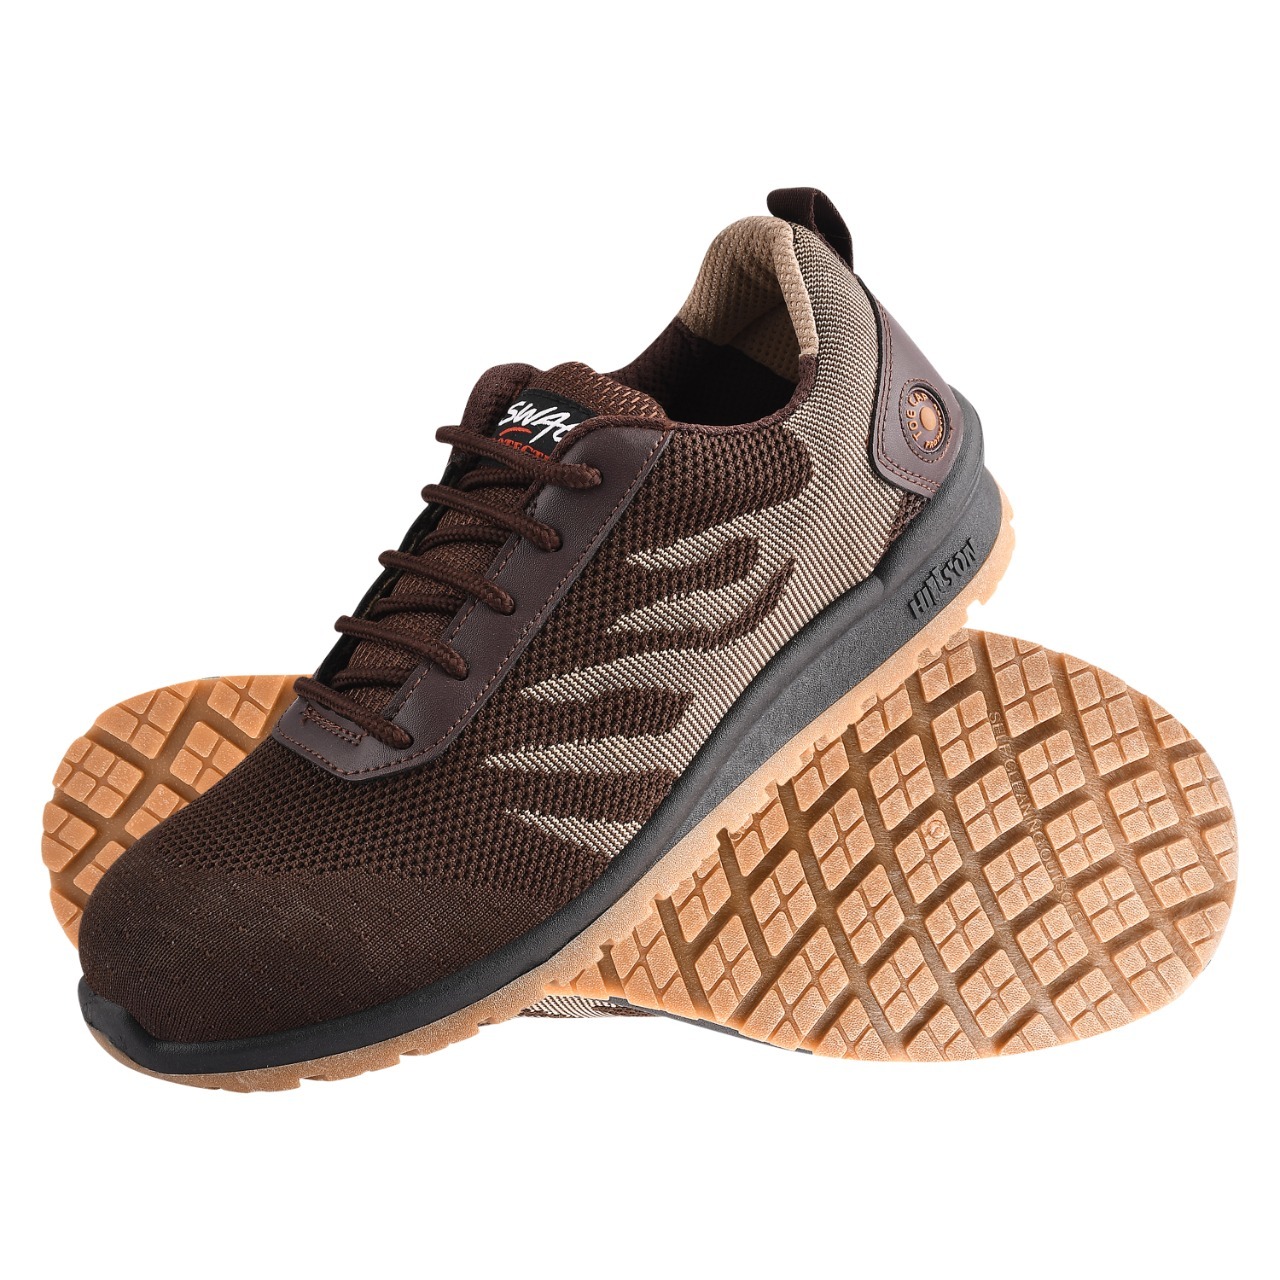 Hillson Swag Brown Stylish Shoes